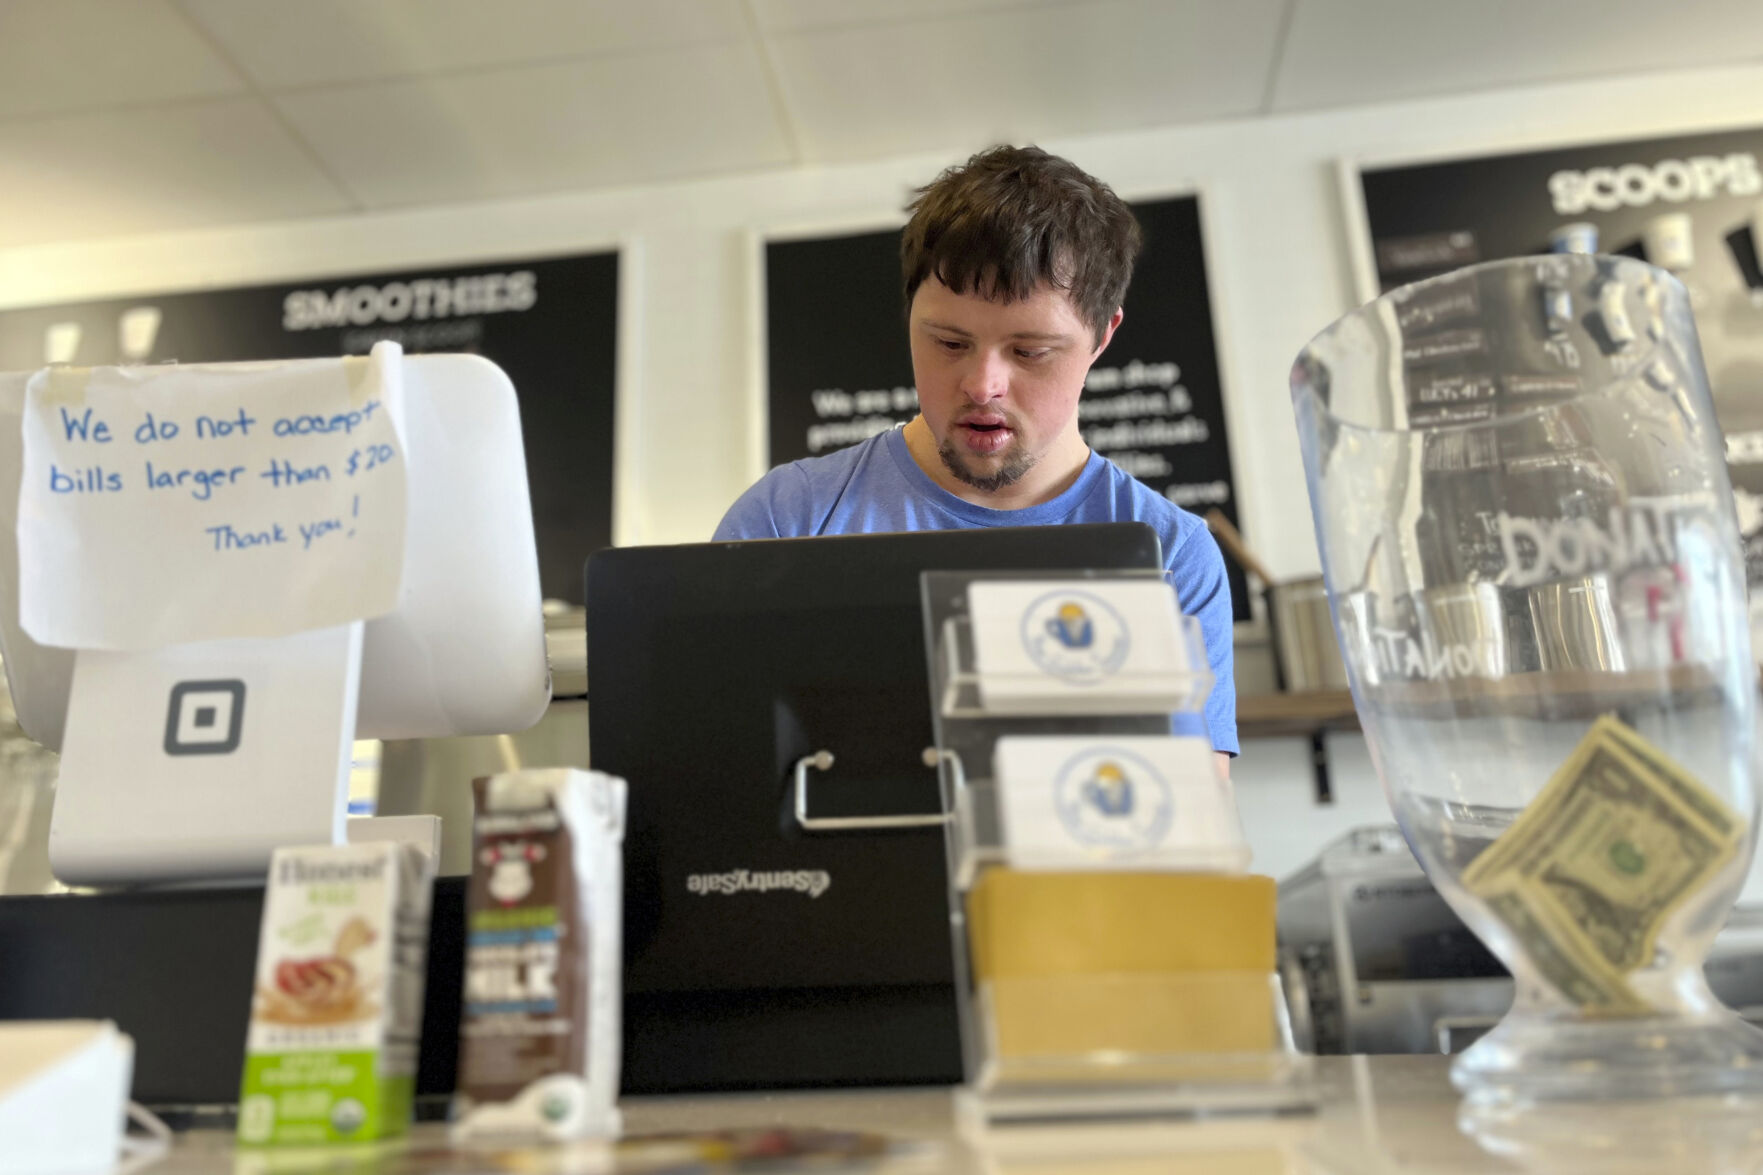 <p>Patrick Chapman, 27, prepares for customers Thursday, March 2, 2023, at The Golden Scoop, an Overland Park, Kan., ice cream and coffee shop that employs workers with developmental disabilities, paying them more than minimum wage. But some disabled workers employed at so-called sheltered workshops are earning far less than minimum wage, an issue that has captured the attention of lawmakers in the state. Disability rights advocates say the practice is discriminatory and more than a dozen states have banned such wages. (AP Photo/Heather Hollingsworth)</p>   PHOTO CREDIT: Heather Hollingsworth